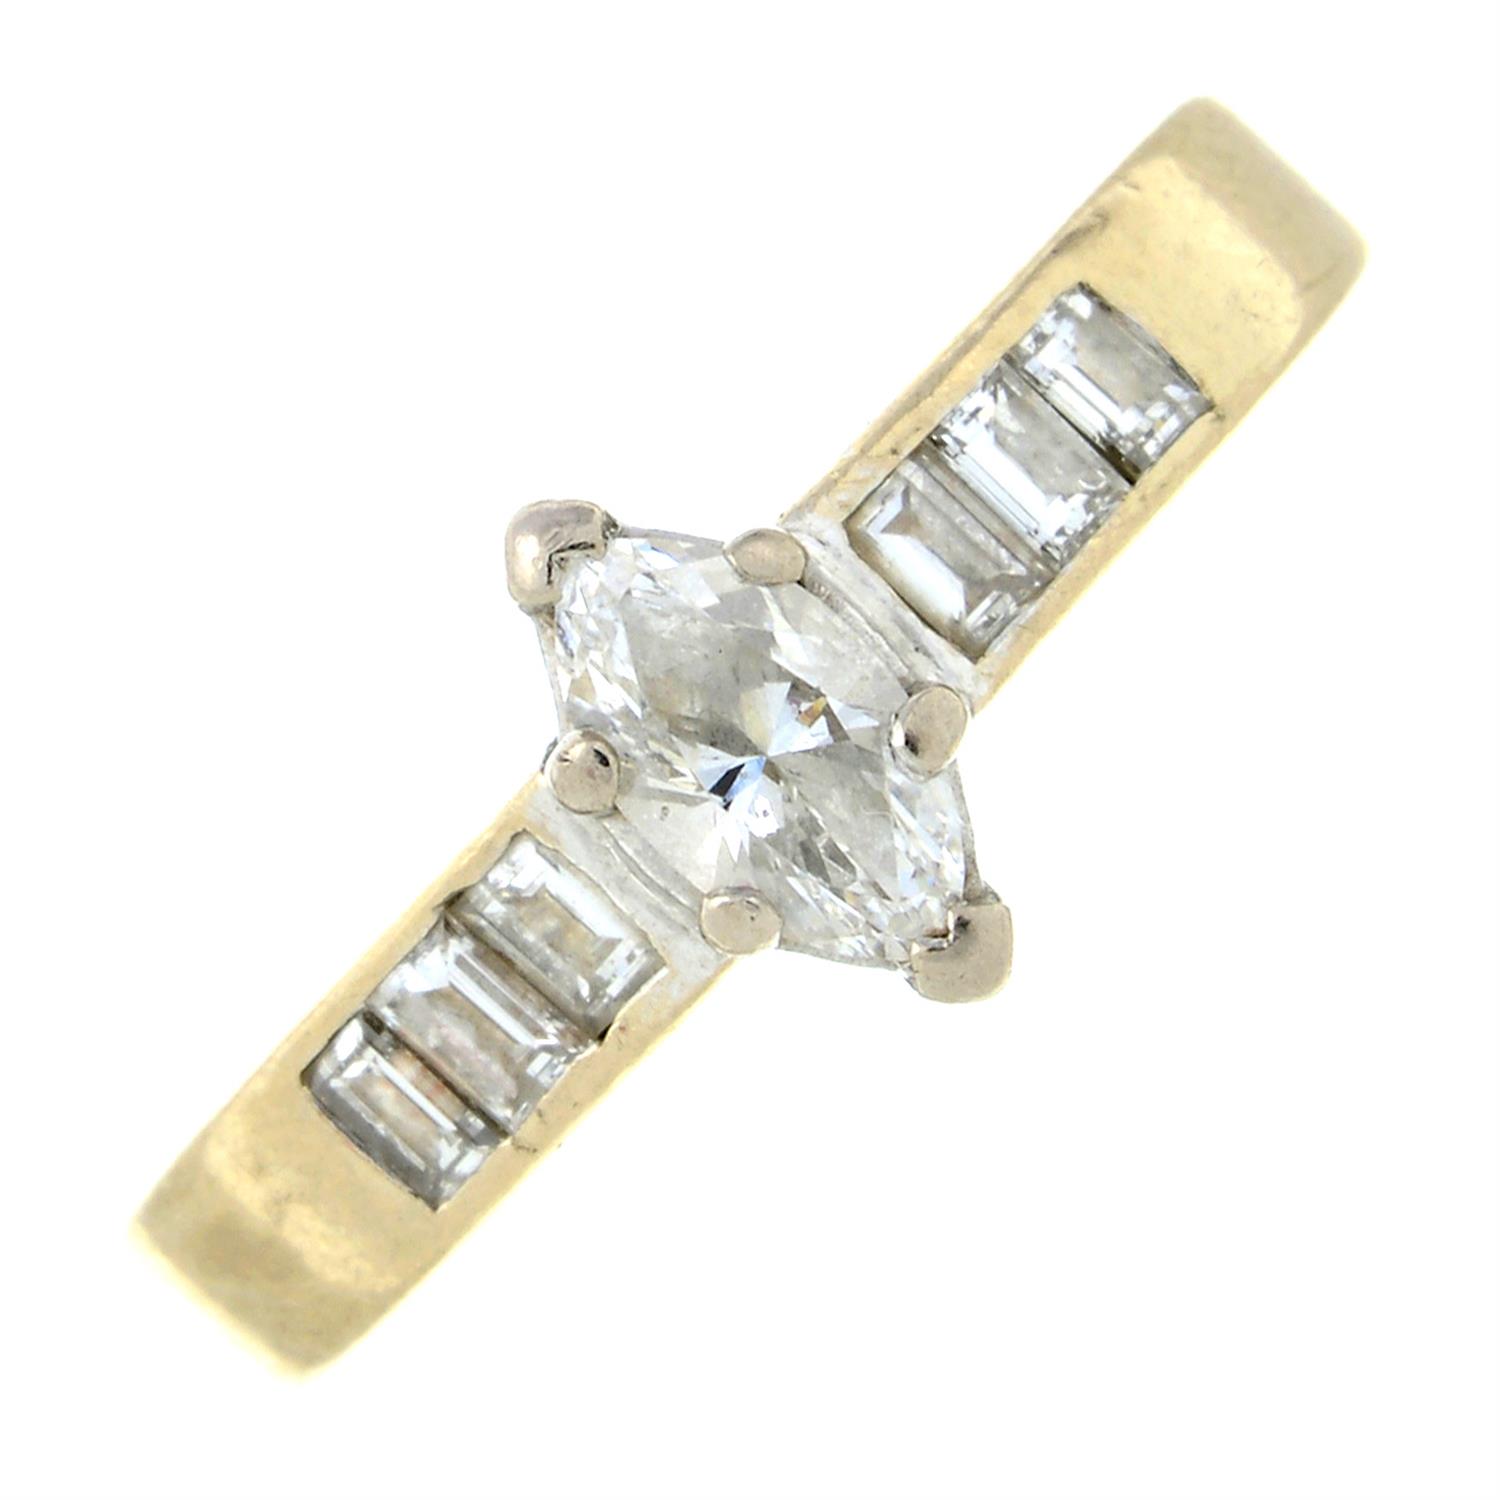 An 18ct gold marquise-shape diamond ring, with baguette-cut diamond sides.